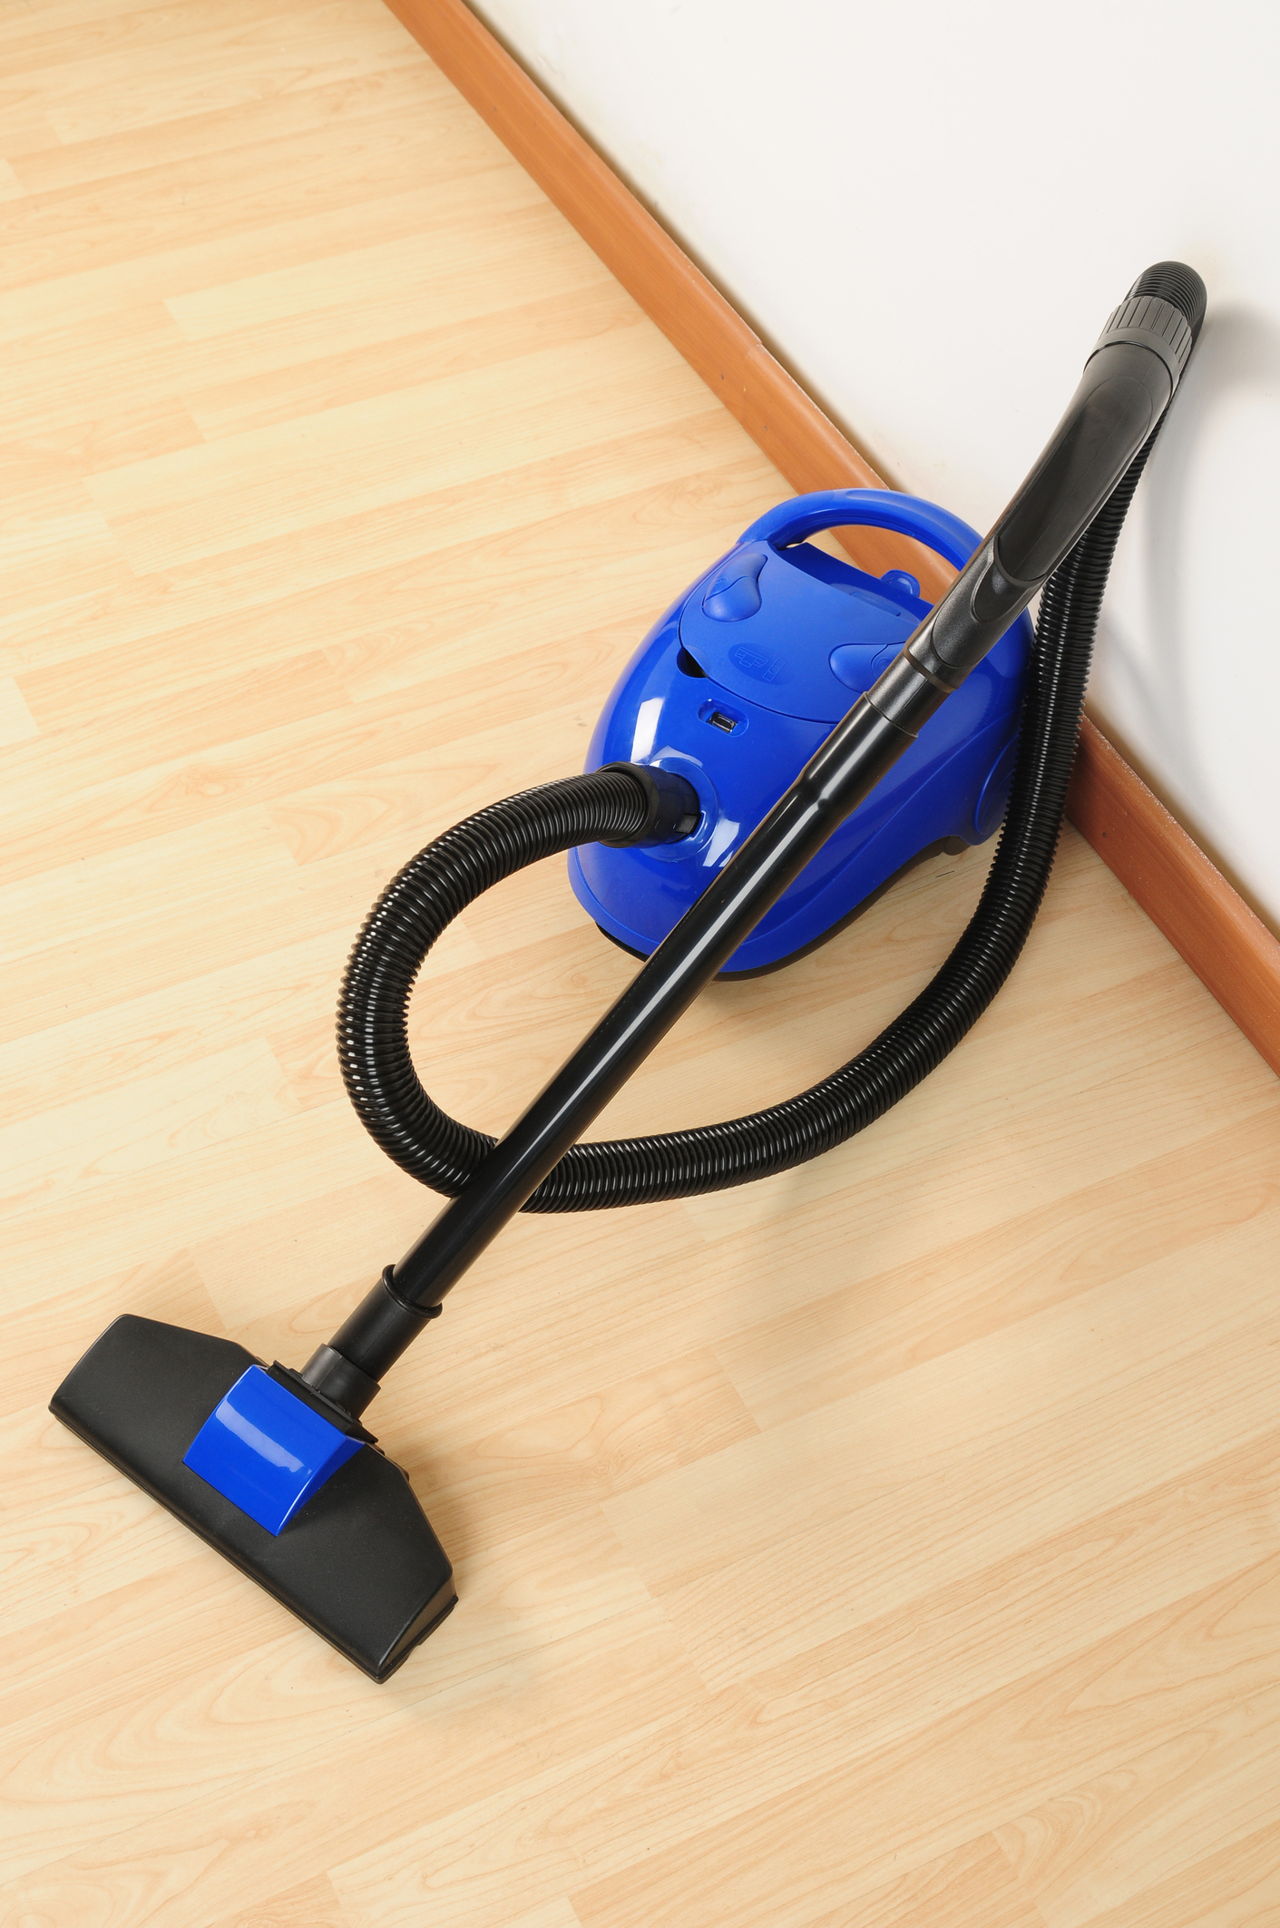 We Ll Tell You How To Clean Laminate, Best Way To Clean Laminate Wood Floors Without Streaking